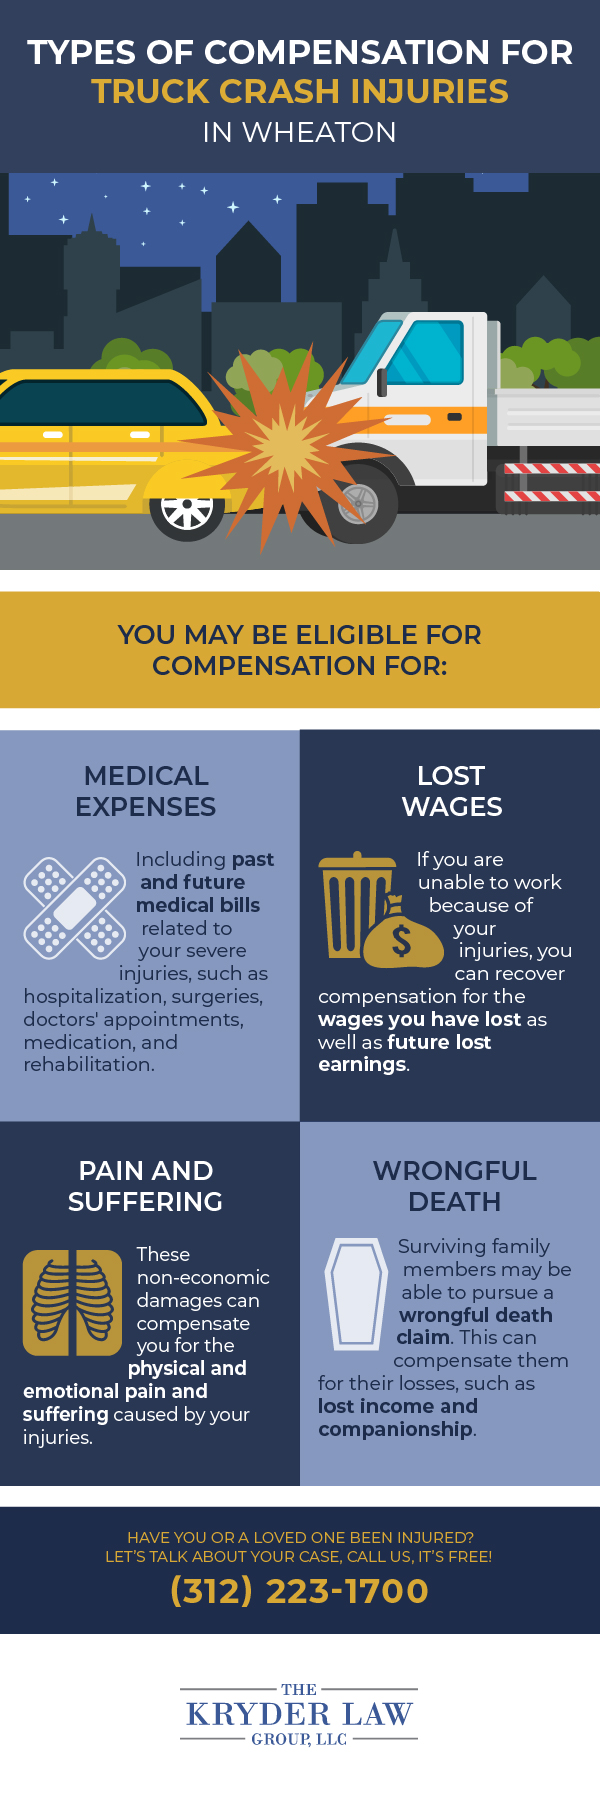 Types of Compensation for Truck Crash Injuries in Wheaton